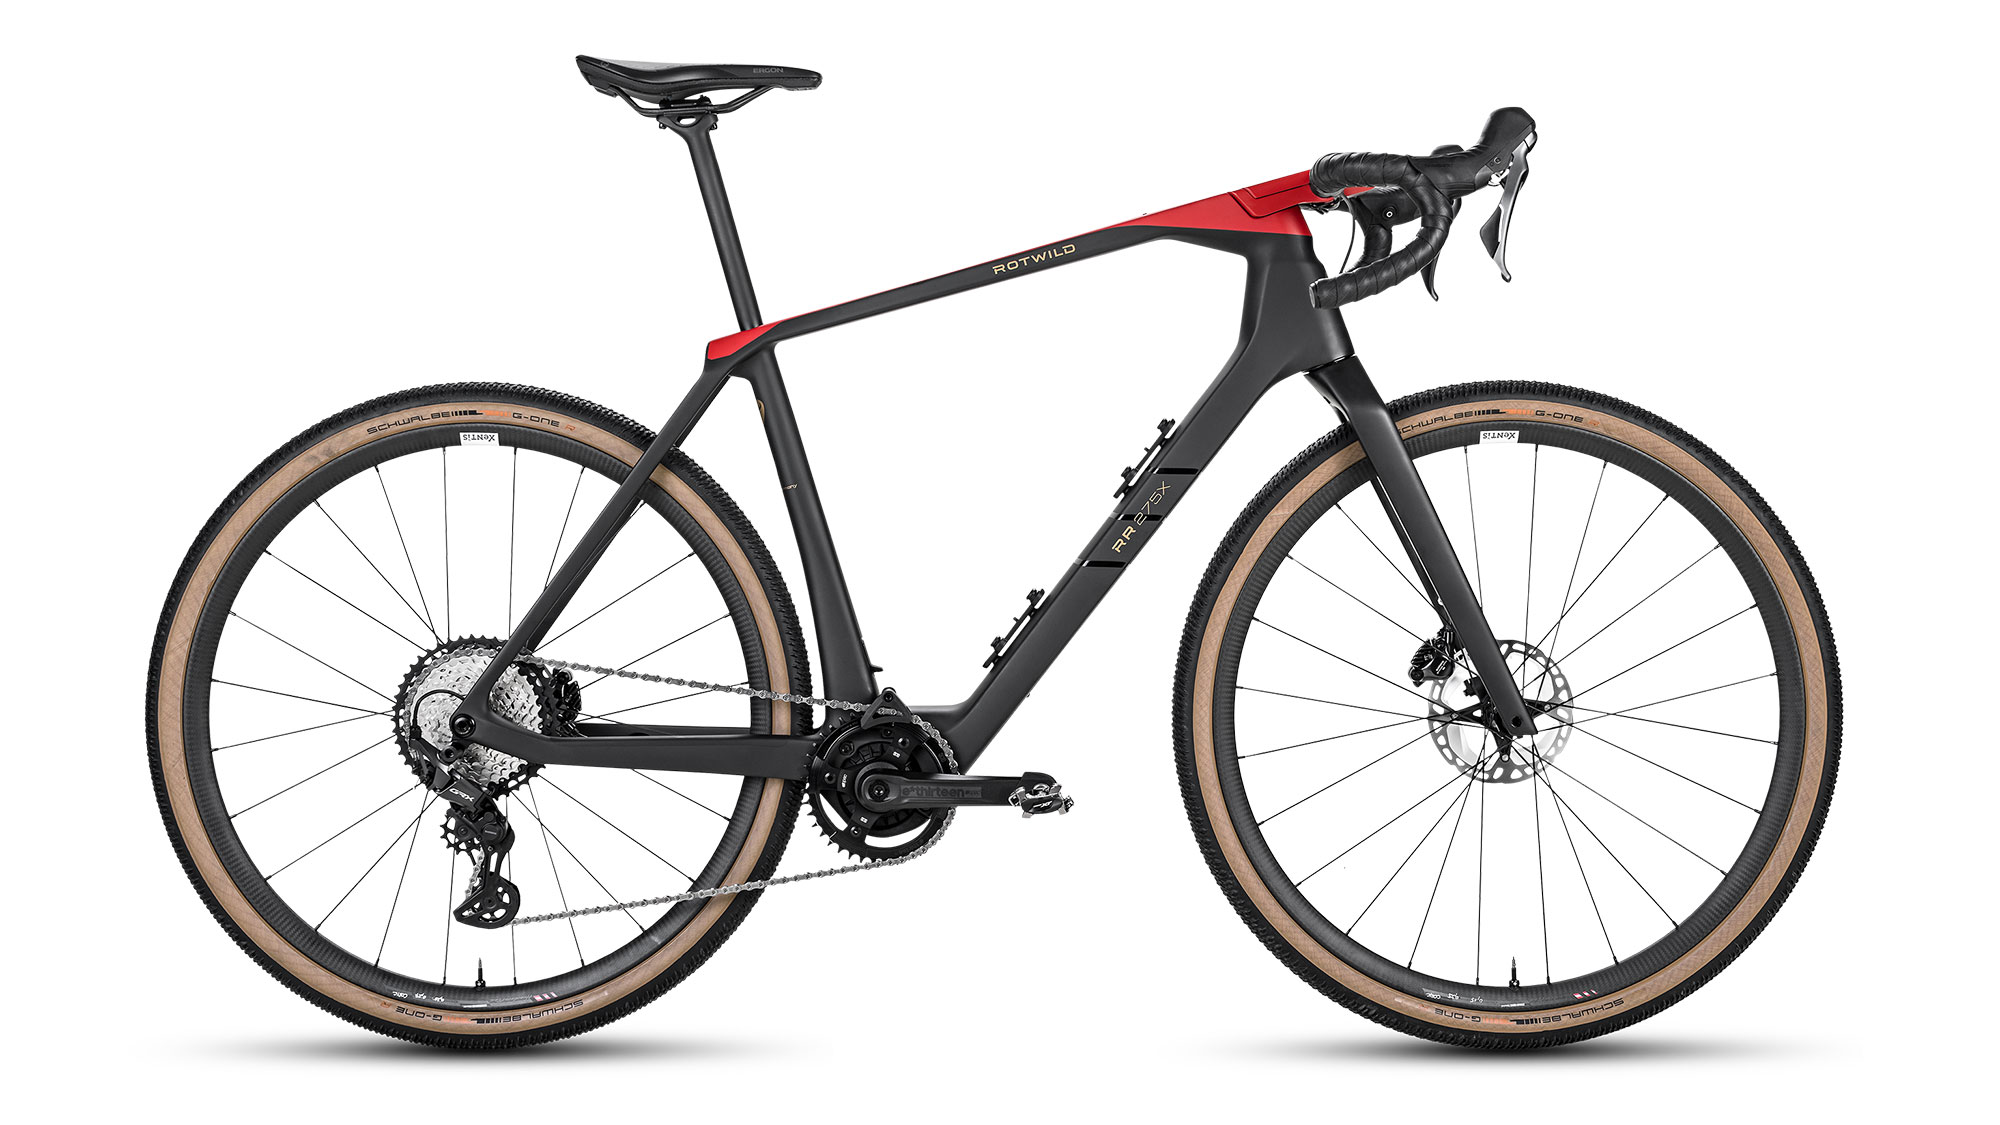 Rotwild R-R275 X gravel ebike, a lightweight TQ-powered fully integrated all-road e-bike, Pro build complete